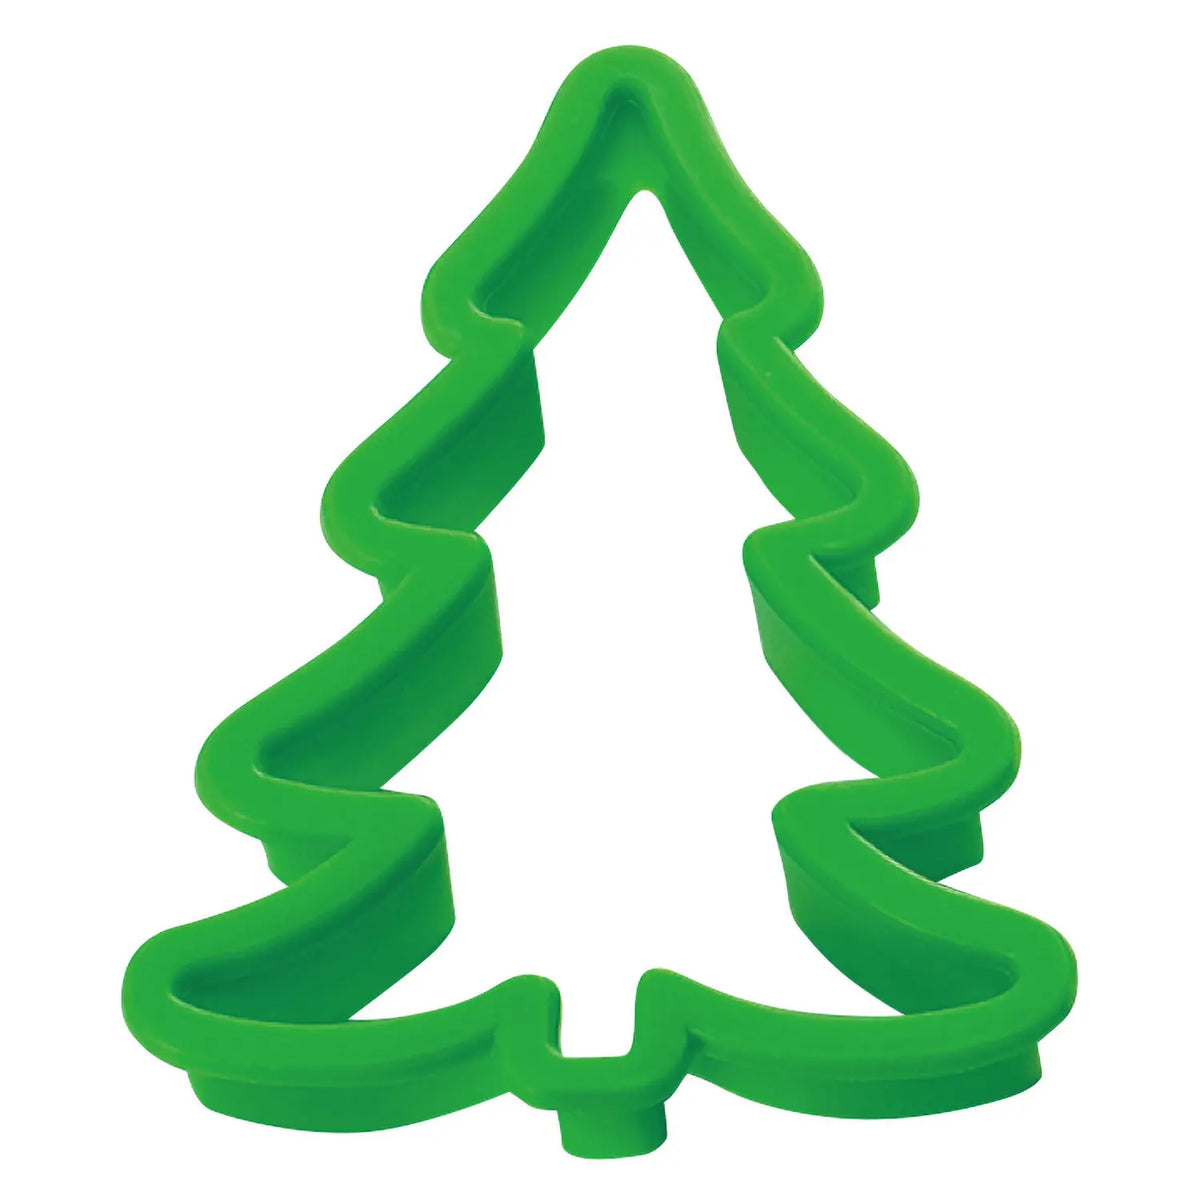 TIGERCROWN Cake Land ABS Resin Cookie Cutter Tree